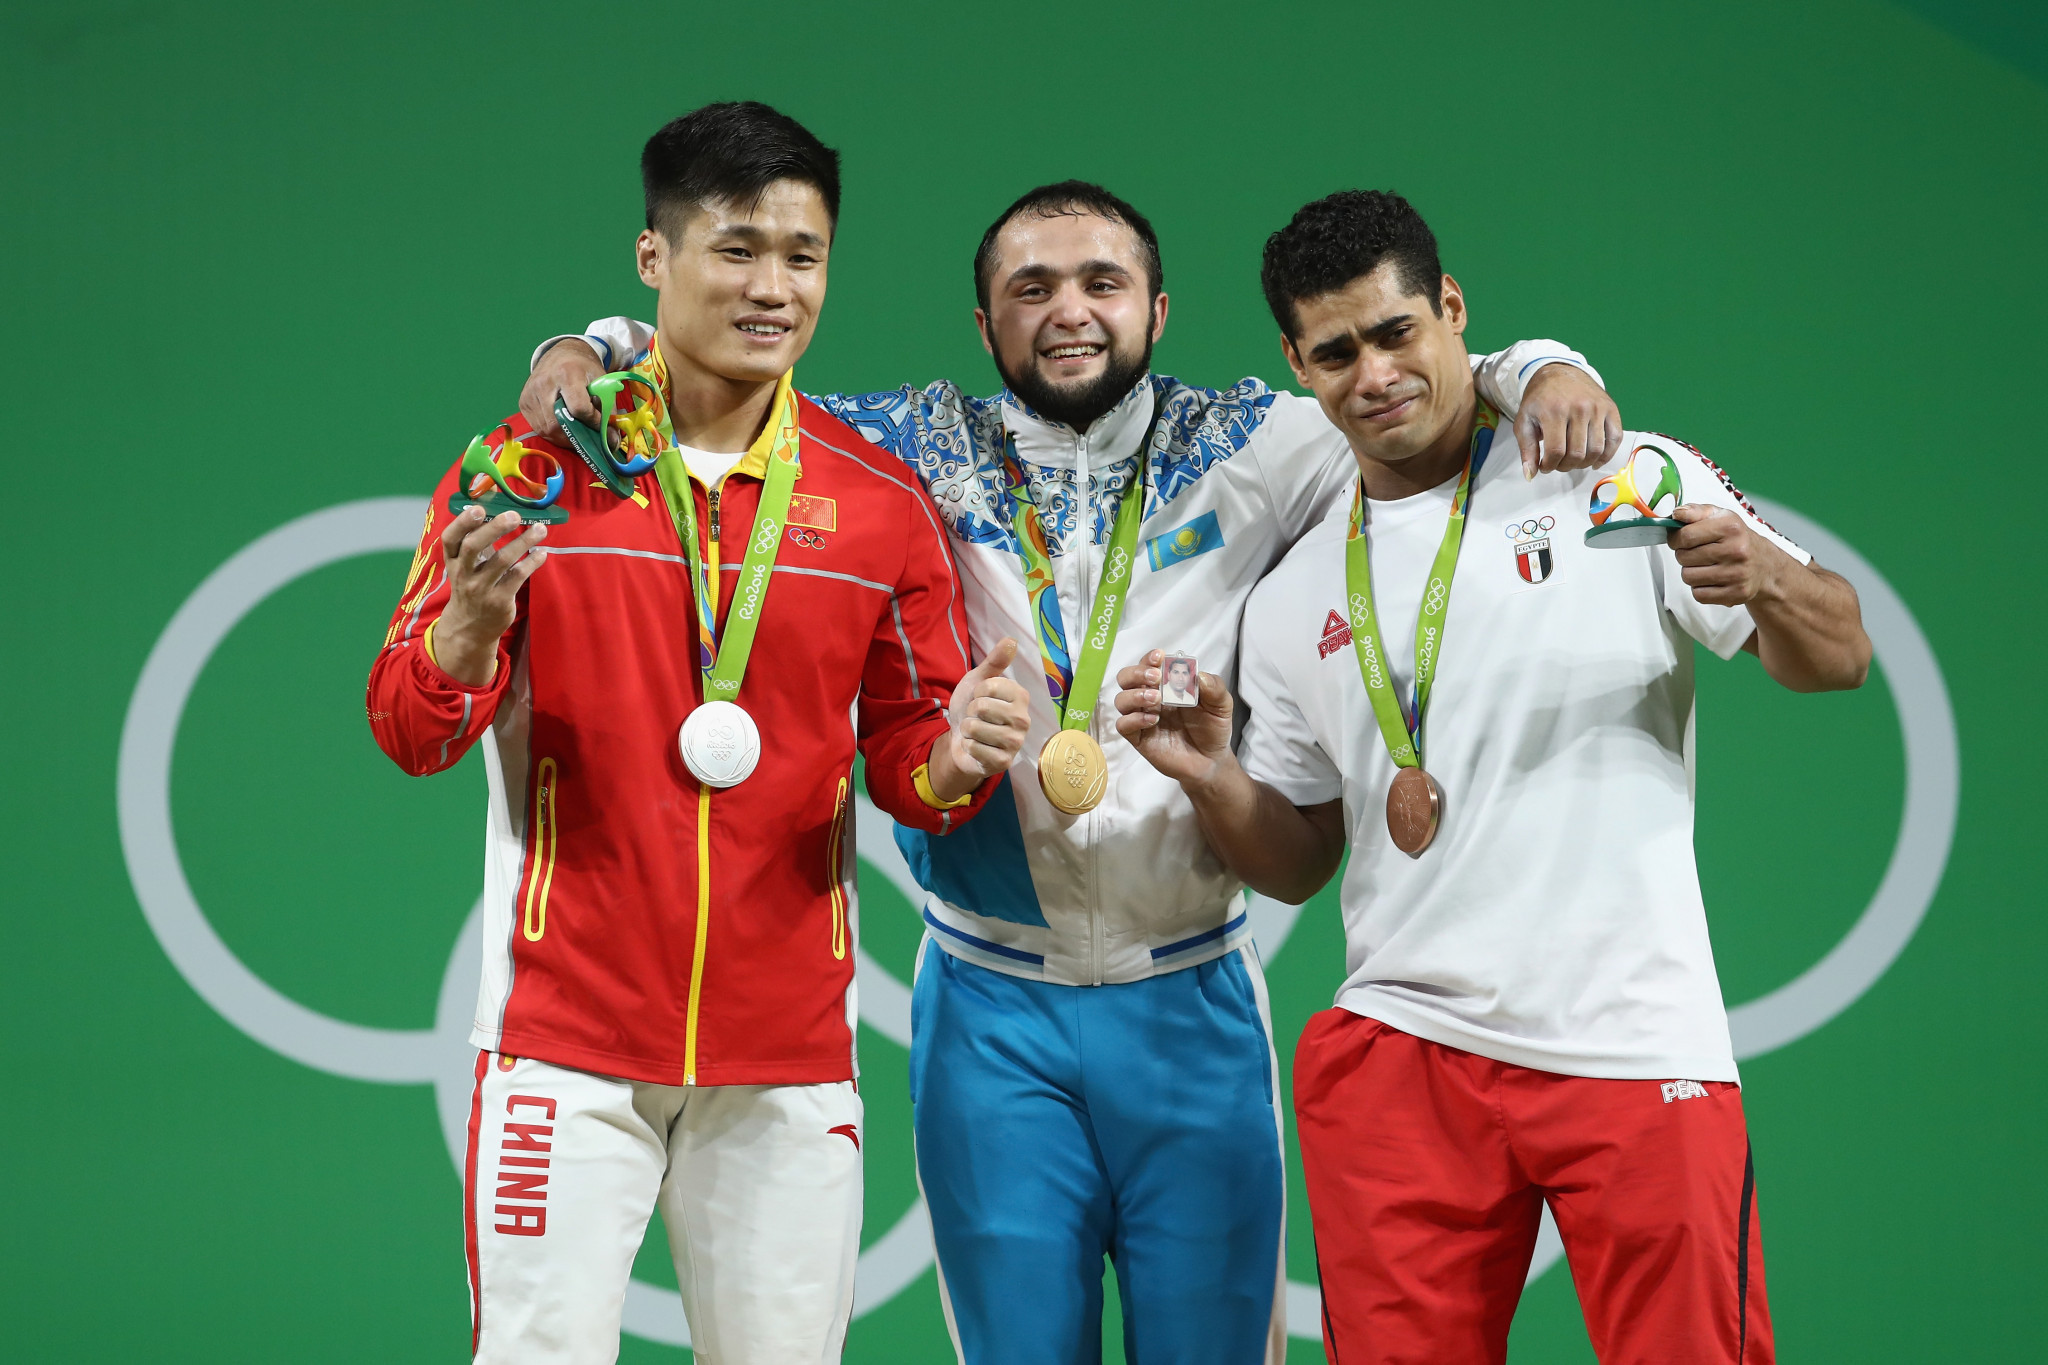 Nijat Rahimov, centre, is among athletes to have been stripped of Rio 2016 medals over doping offences ©Getty Images